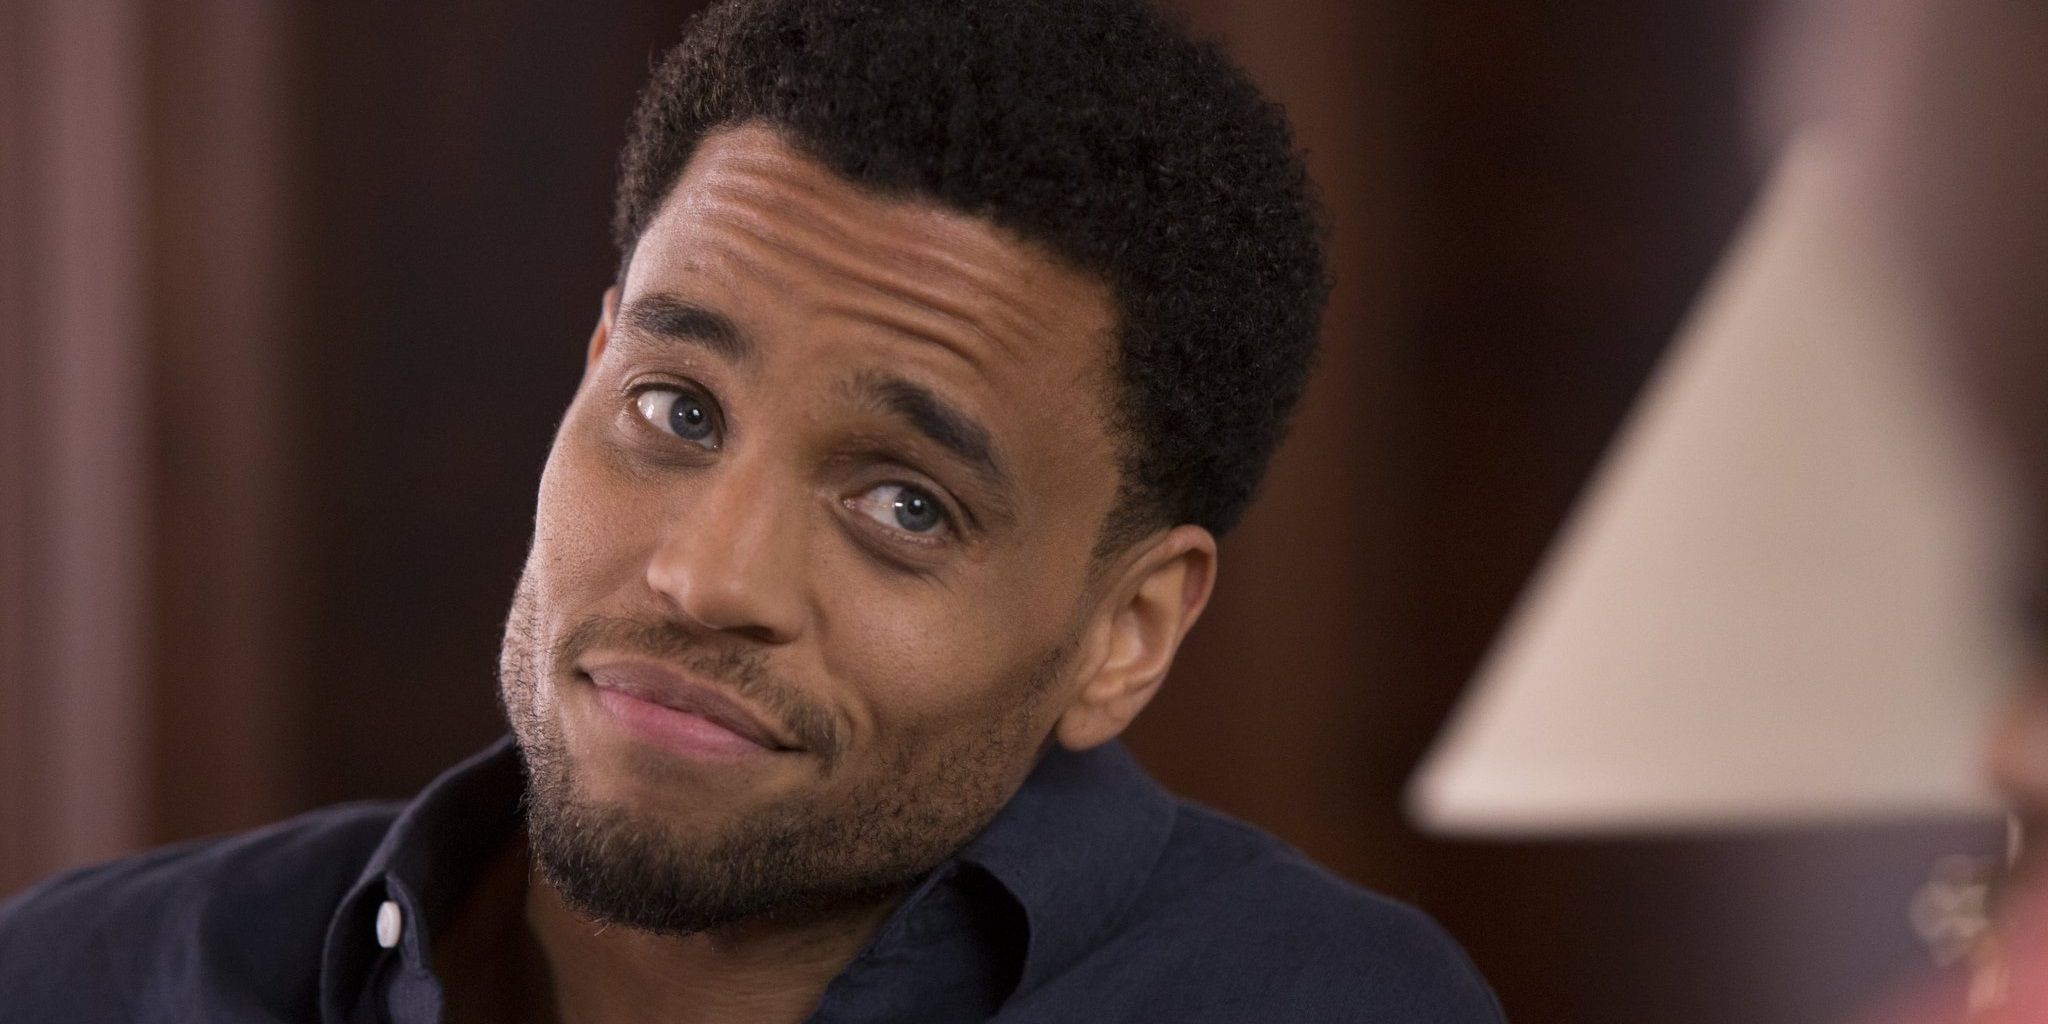 Michael Ealy smiling in Think Like a Man